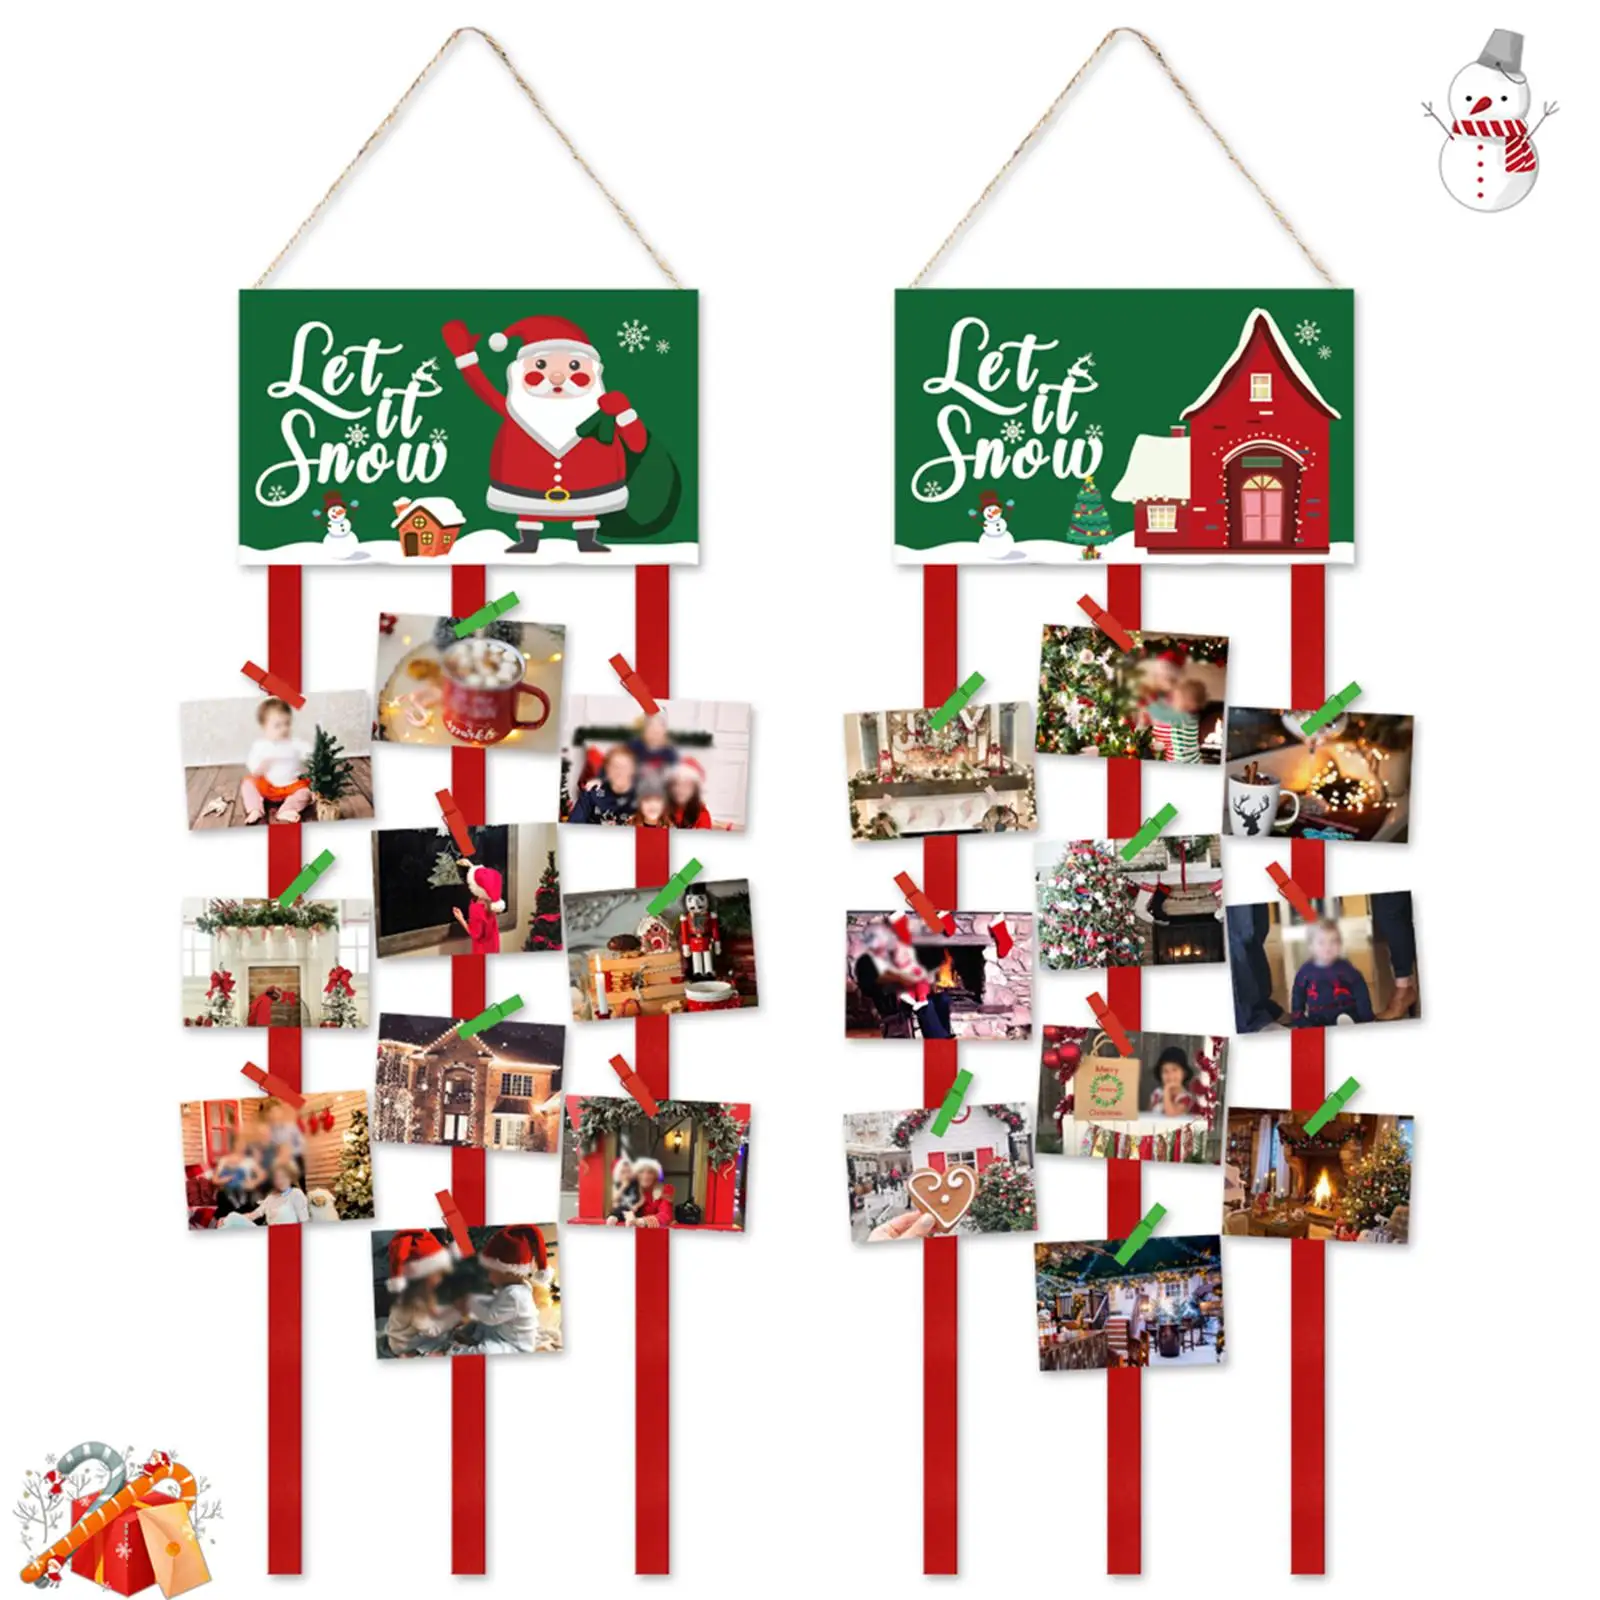 2x Christmas Card Holder with 40 Clips Greeting Cards Photos Display for Dorm Festival Office Living Room Christmas Decoration